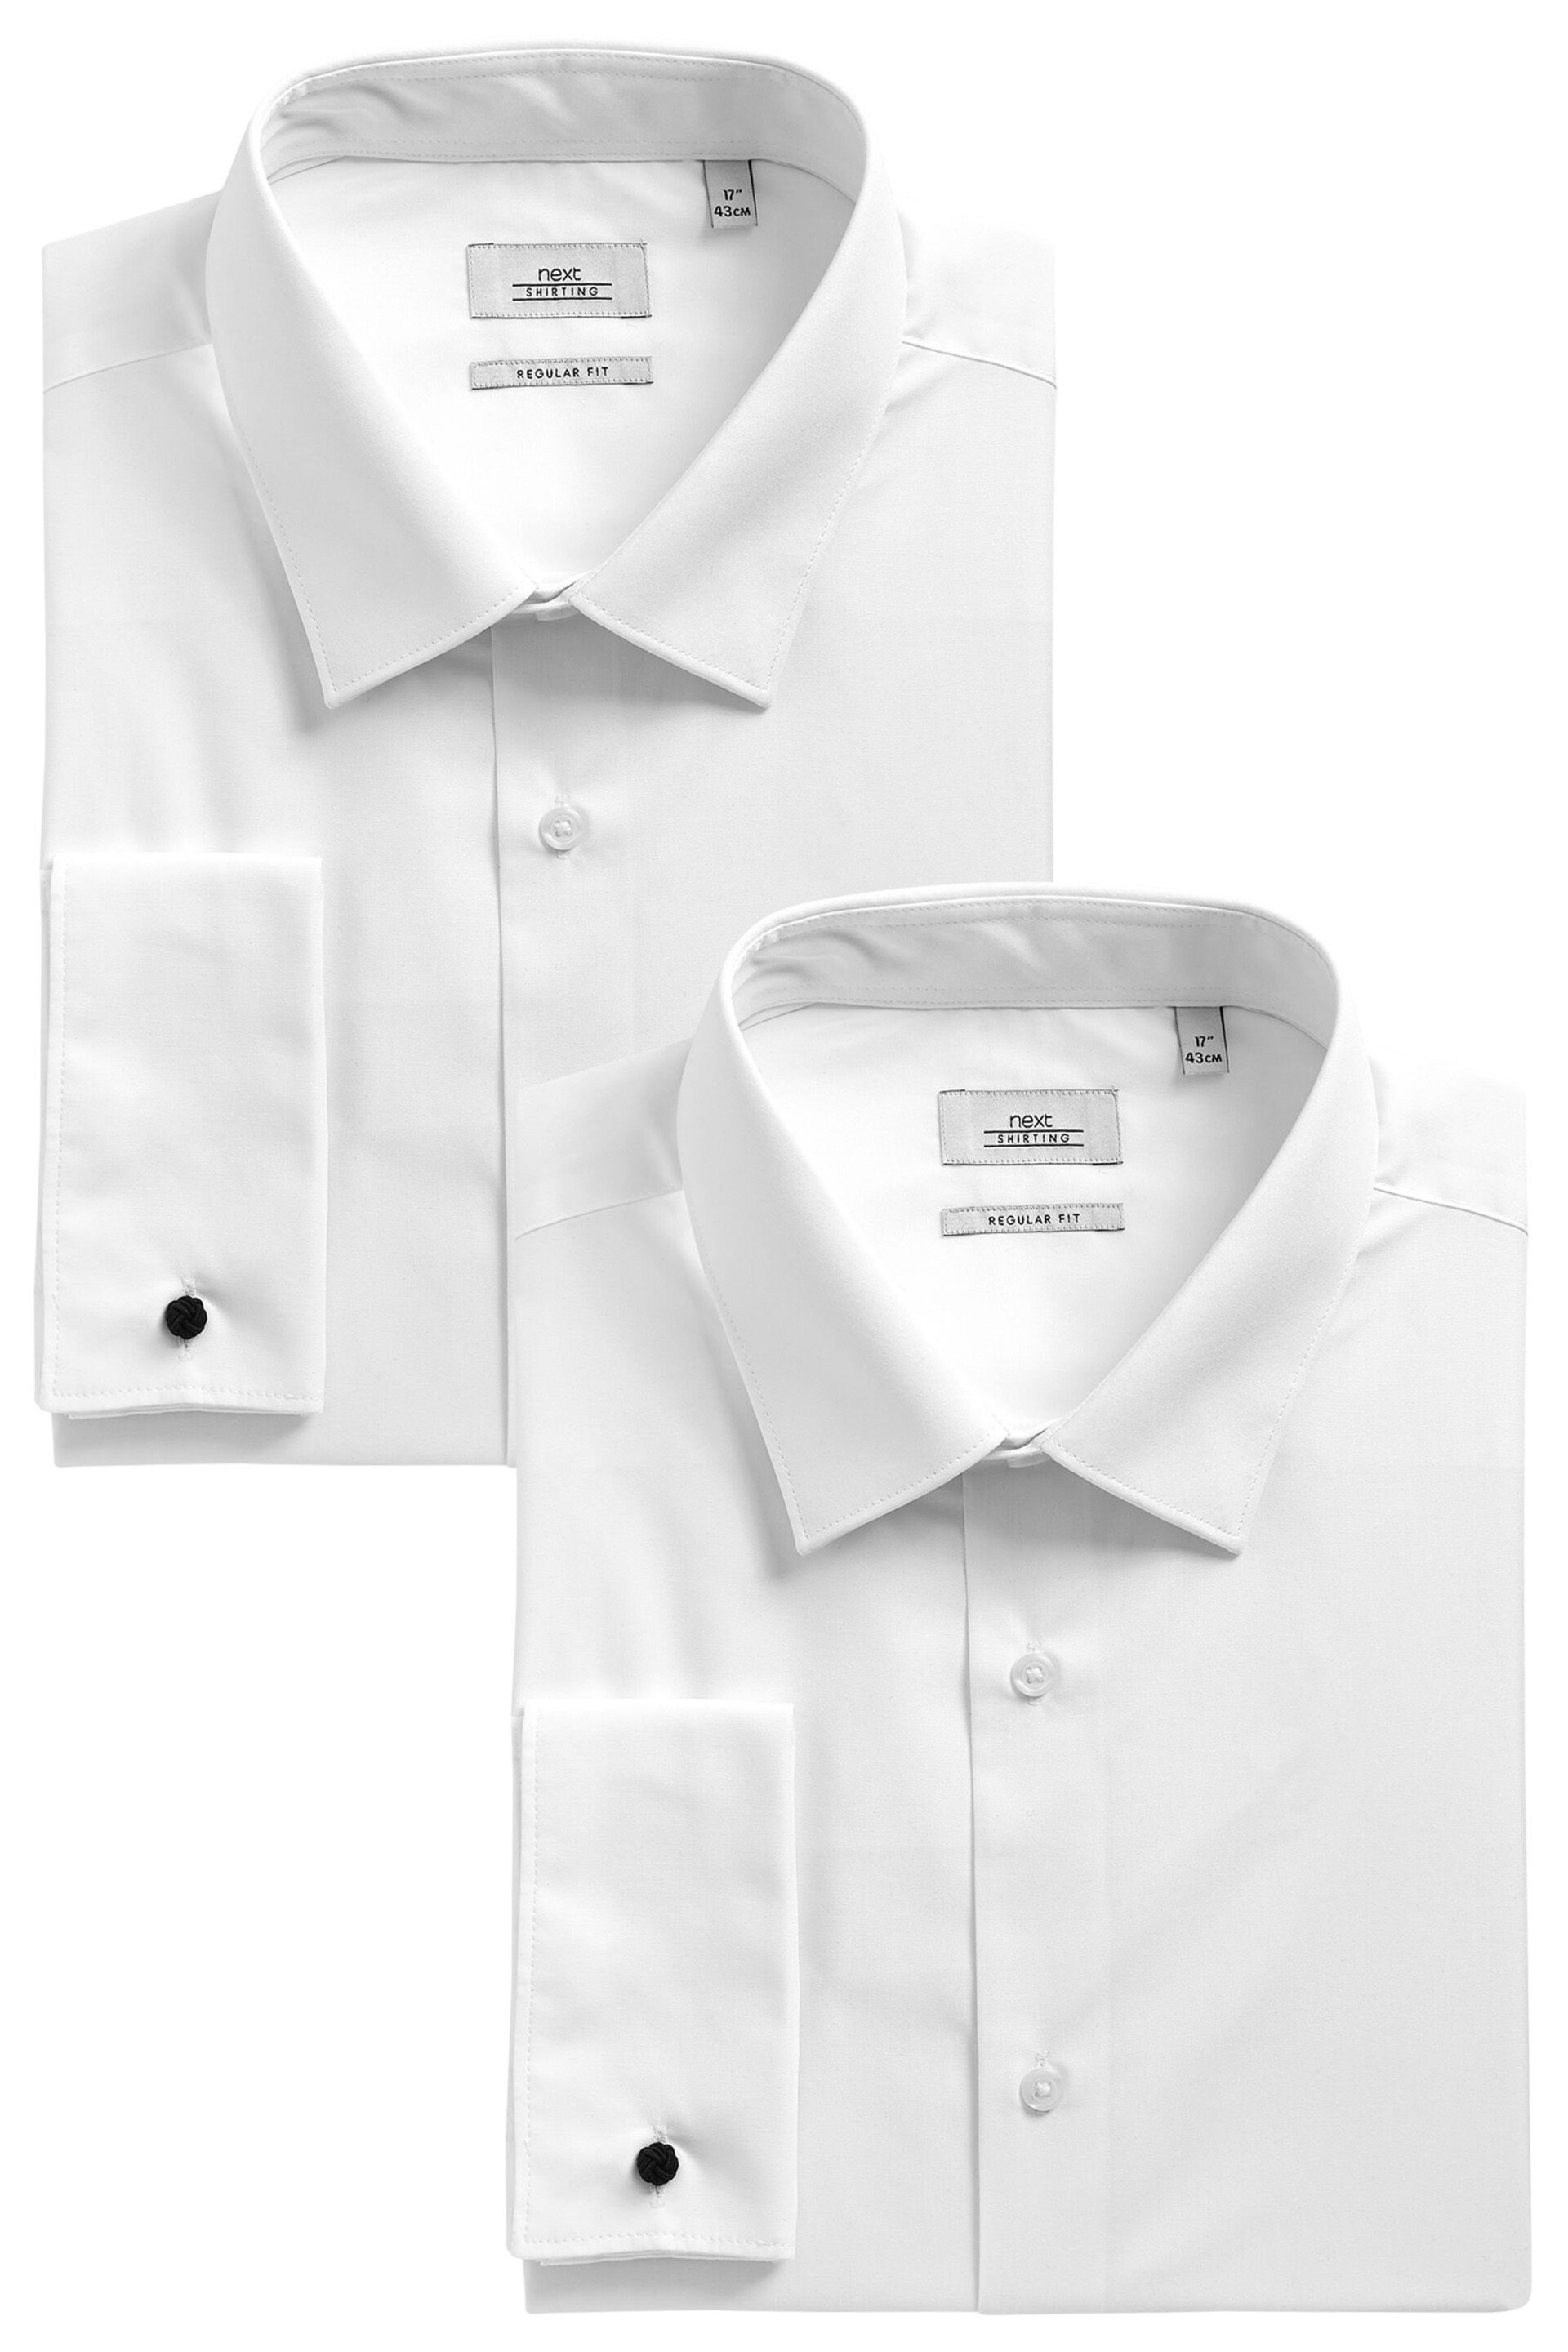 White Regular Fit Double Cuff Shirts 2 Pack - Image 1 of 6